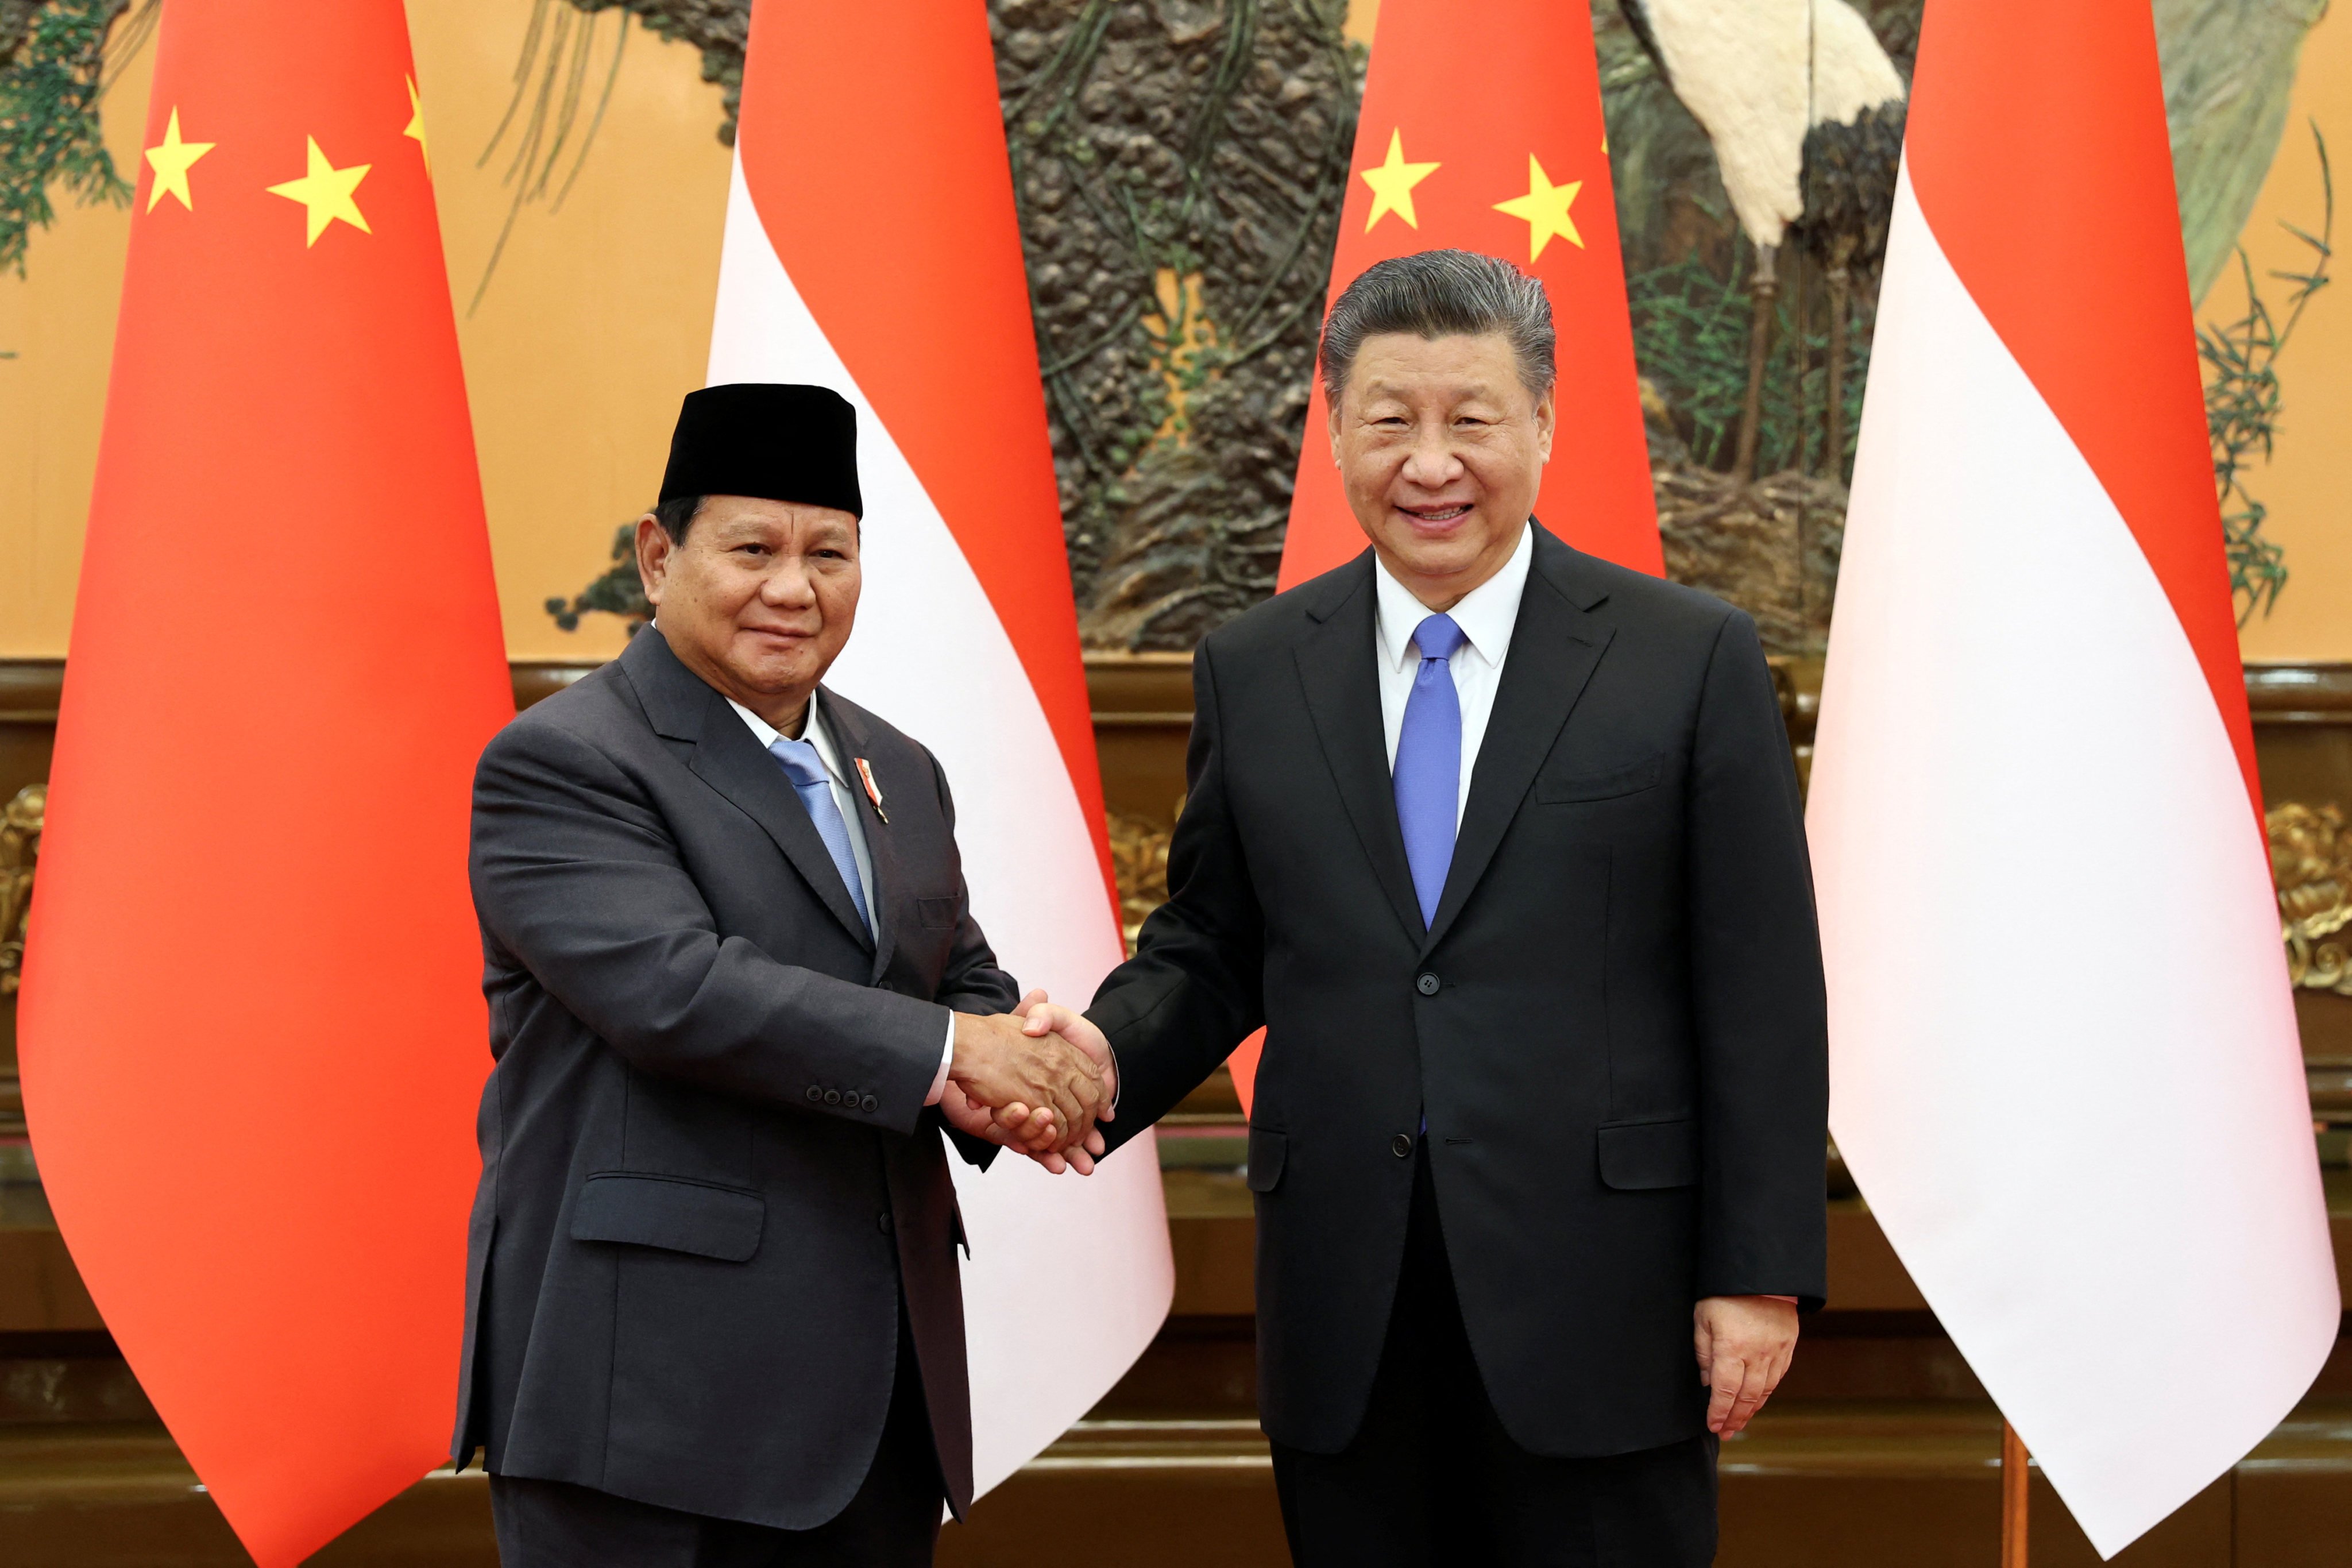 Chinese President Xi Jinping and Indonesia’s President-elect Prabowo Subianto shake hands at the Great Hall of the People in Beijing, China, on April 1. Photo: China Daily via Reuters